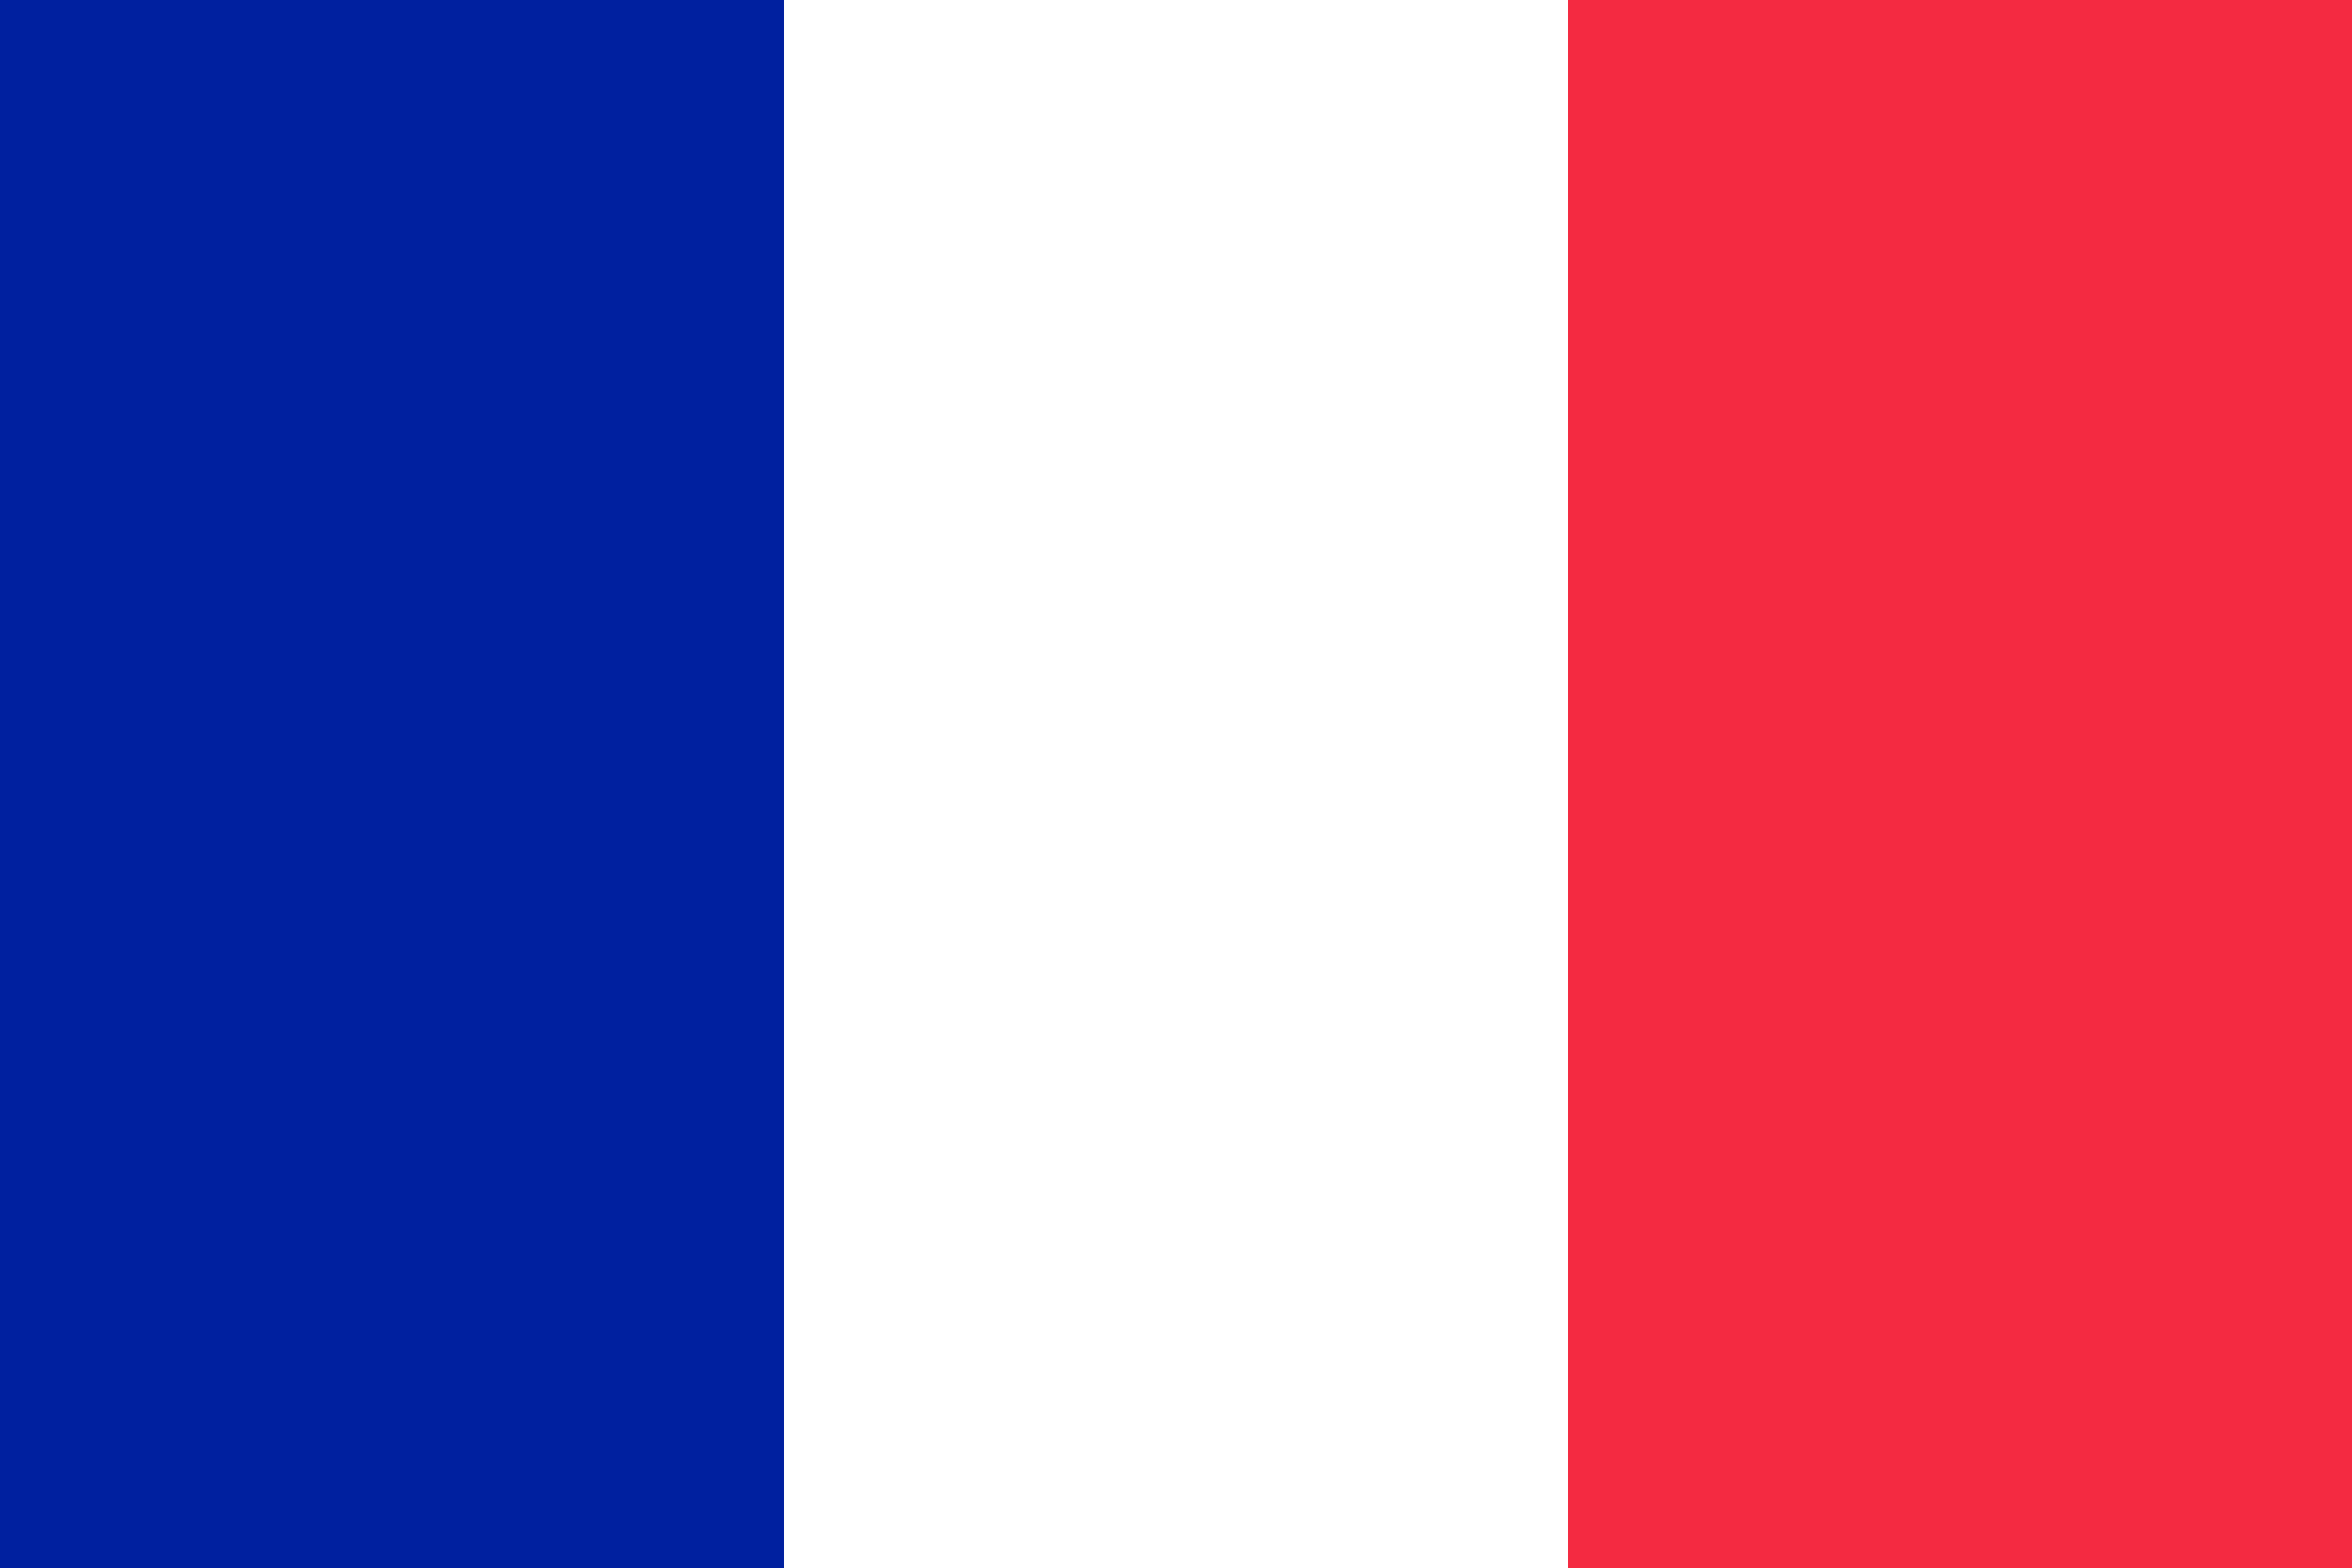 the image shows the french flag